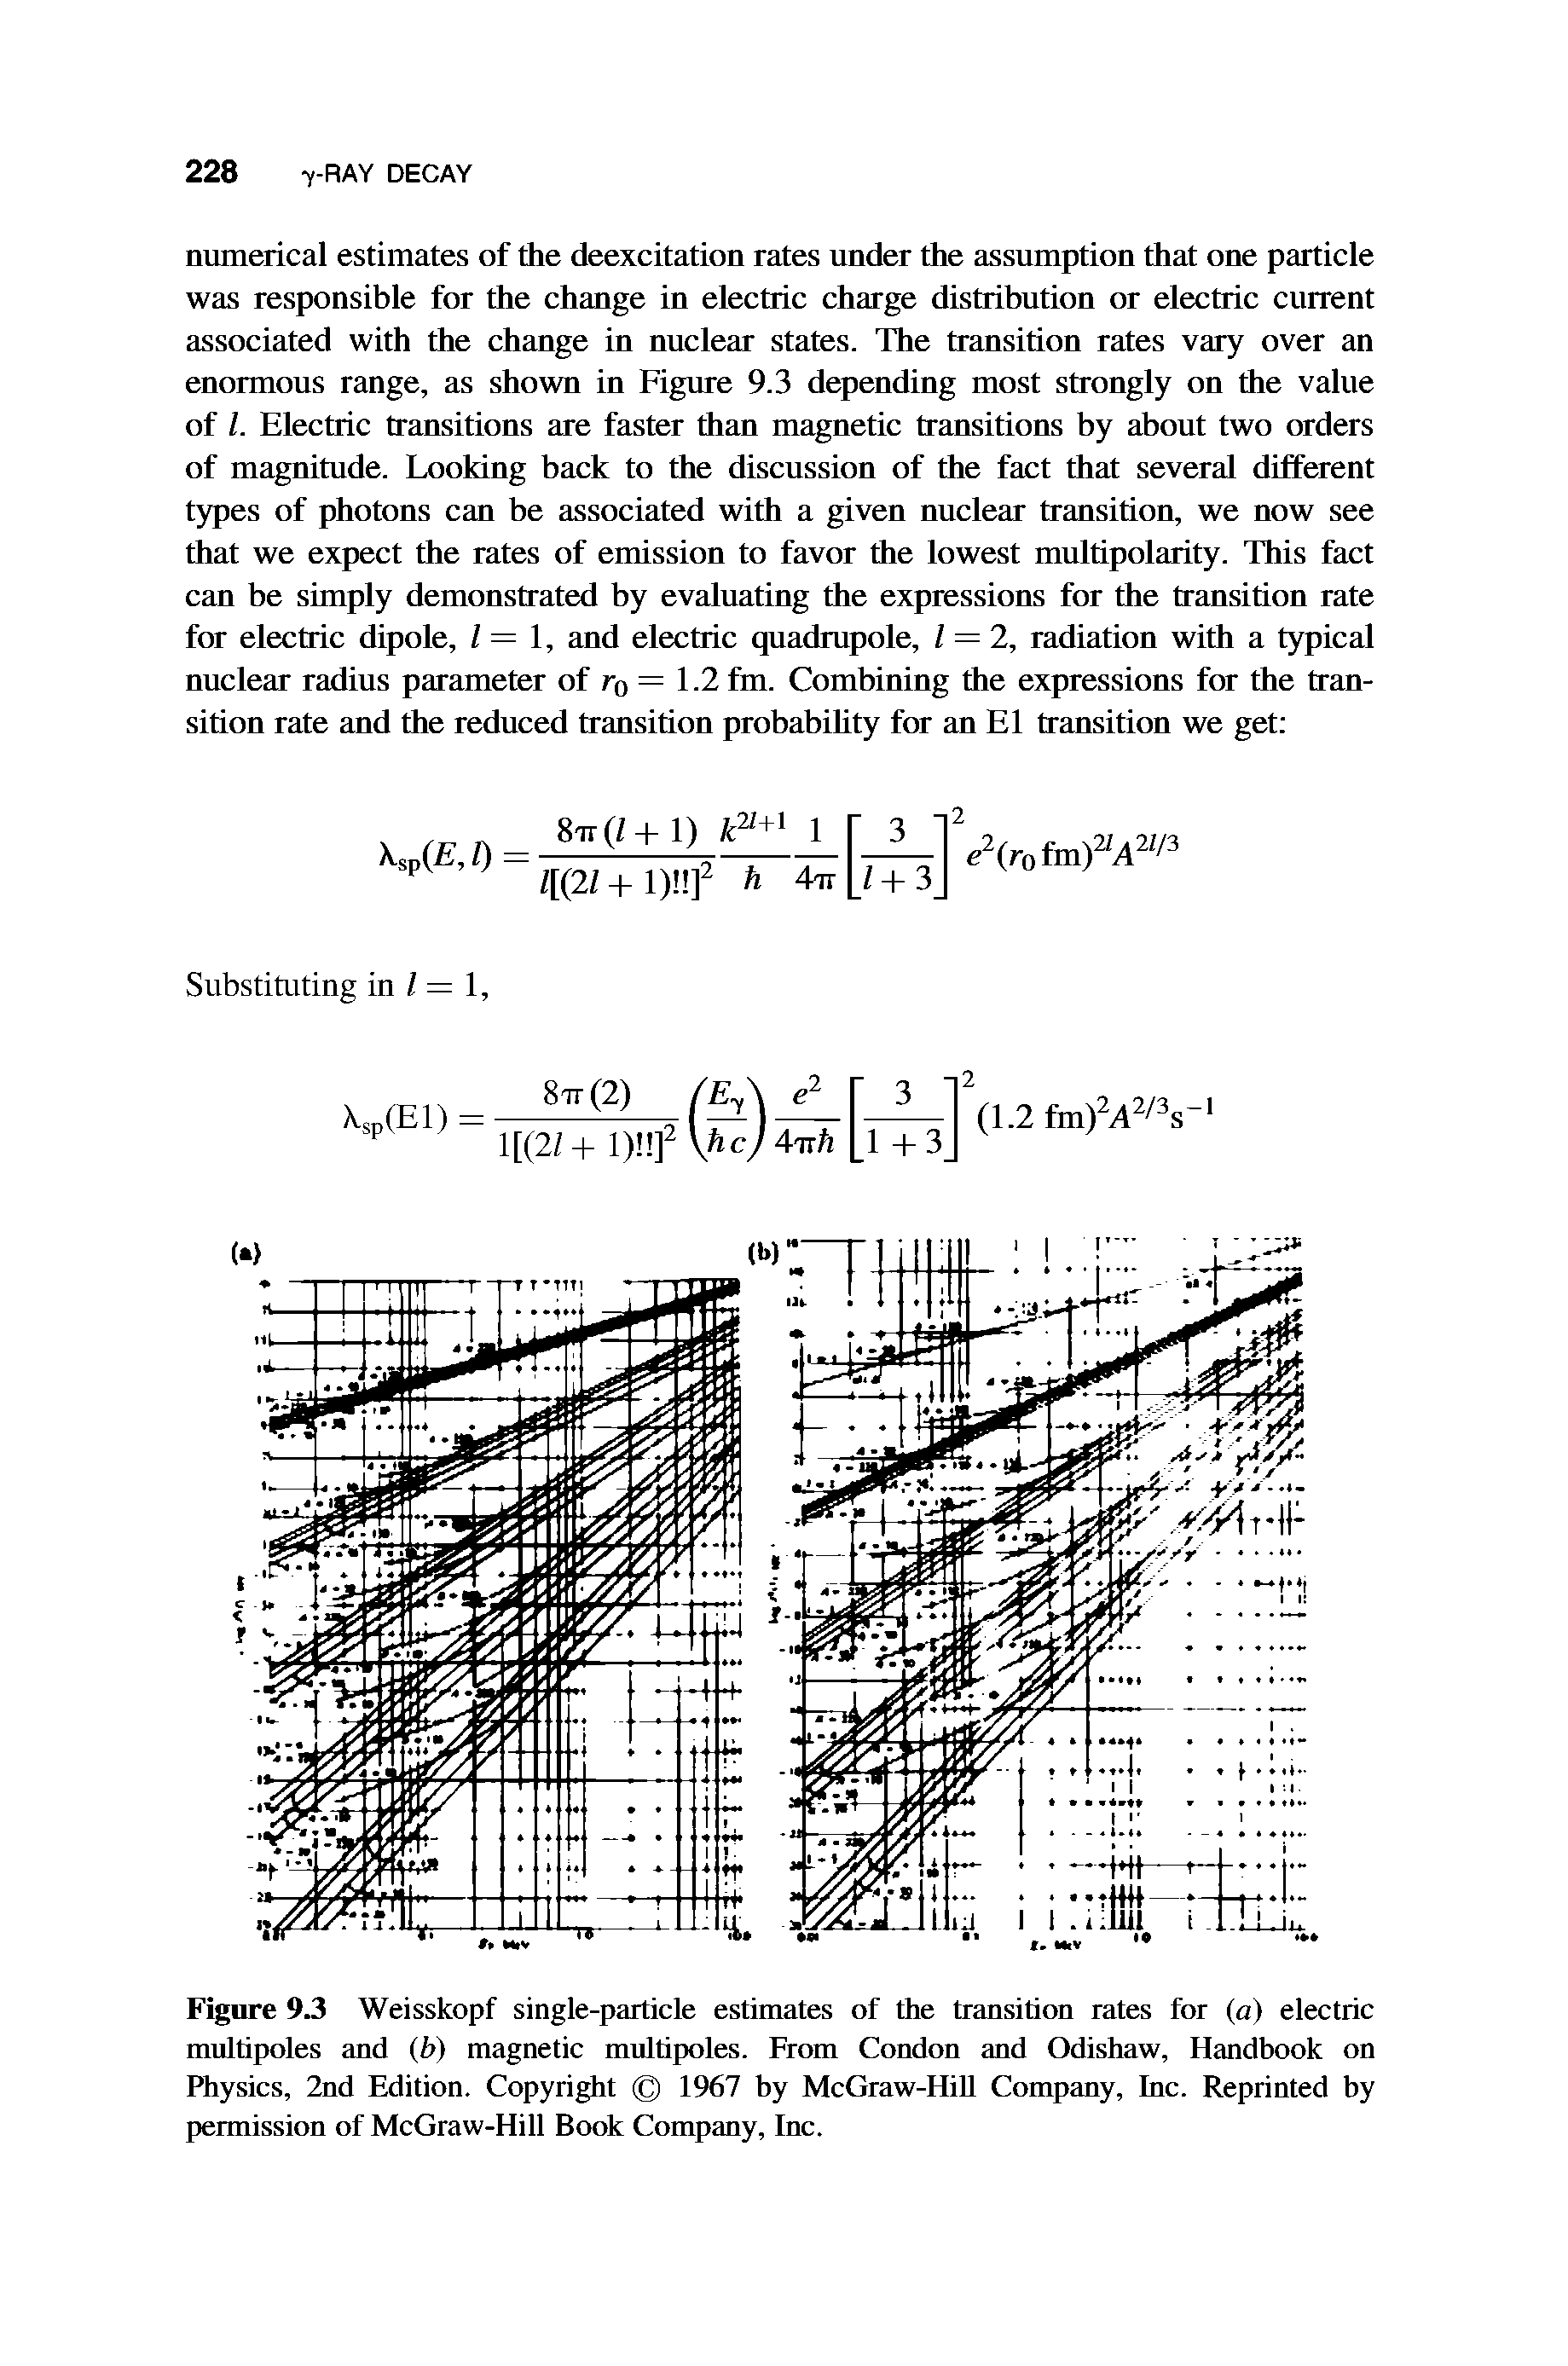 Figure 9.3 Weisskopf single-particle estimates of the transition rates for (a) electric multipoles and (b) magnetic multipoles. From Condon and Odishaw, Handbook on Physics, 2nd Edition. Copyright 1967 hy McGraw-Hill Company, Inc. Reprinted by permission of McGraw-Hill Book Company, Inc.